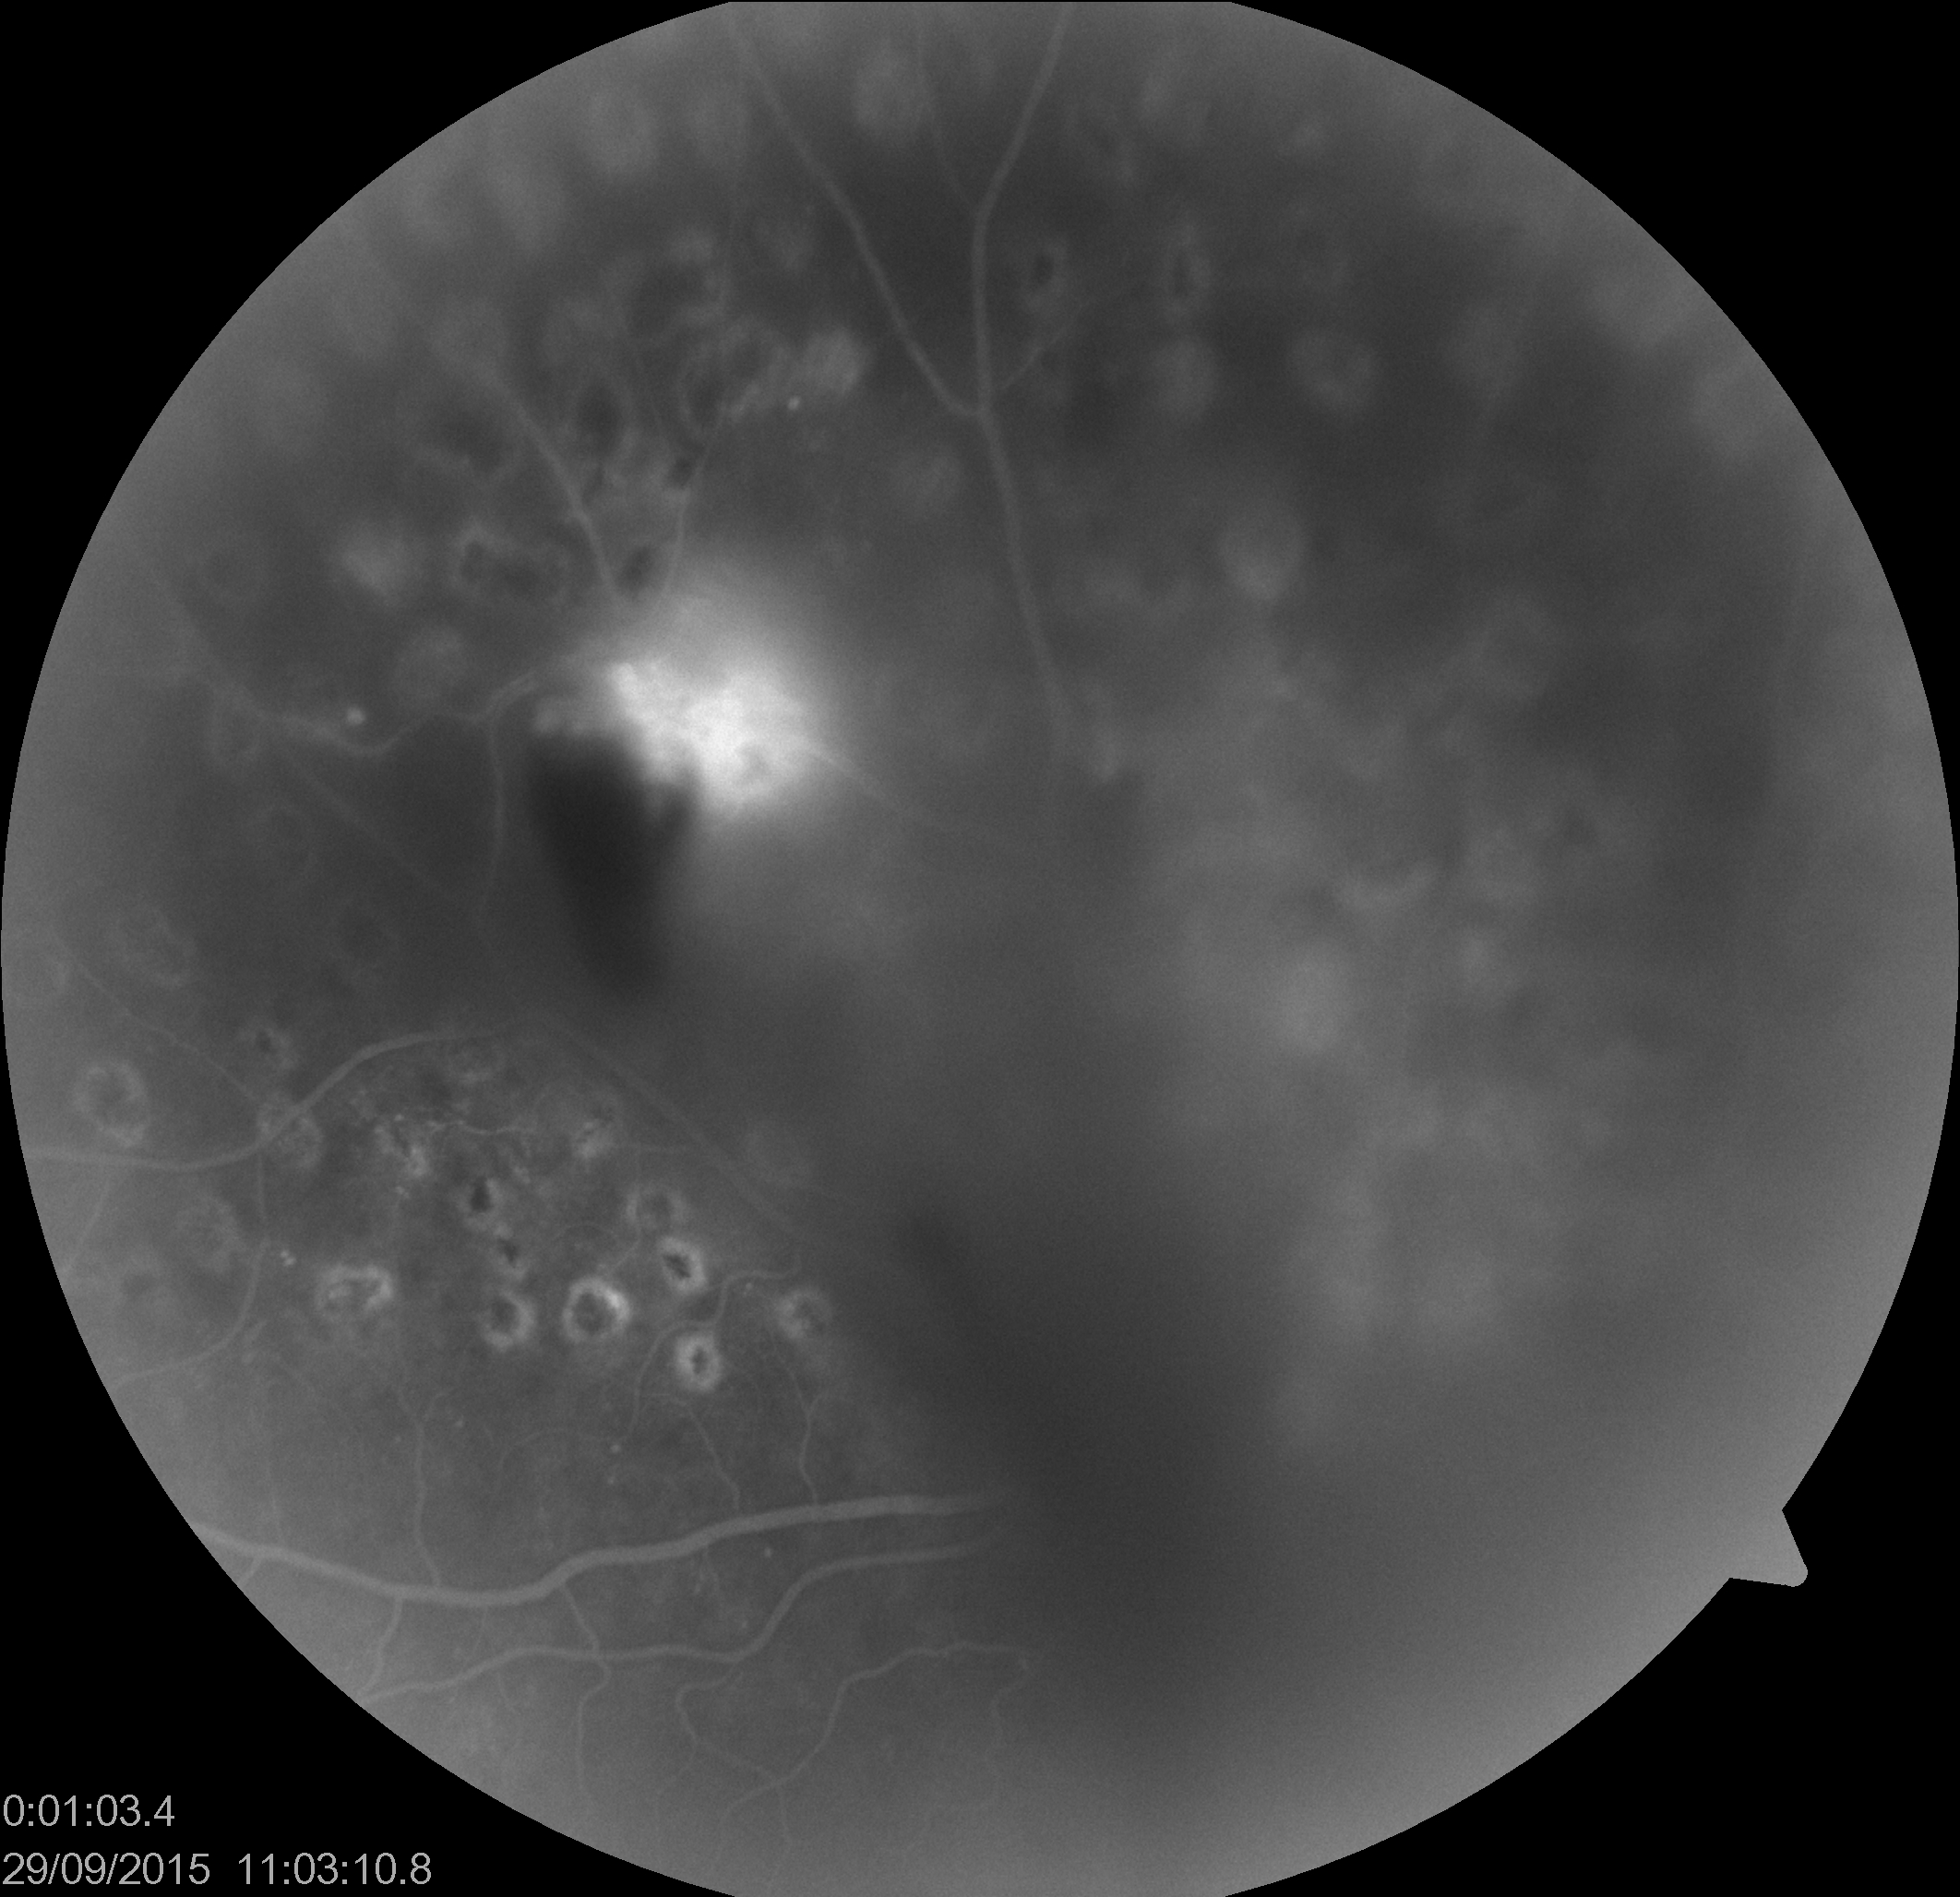 Fundus Fluorescein angiography of the same eye shows leakage from an active NVE (neovascularisation elsewhere)